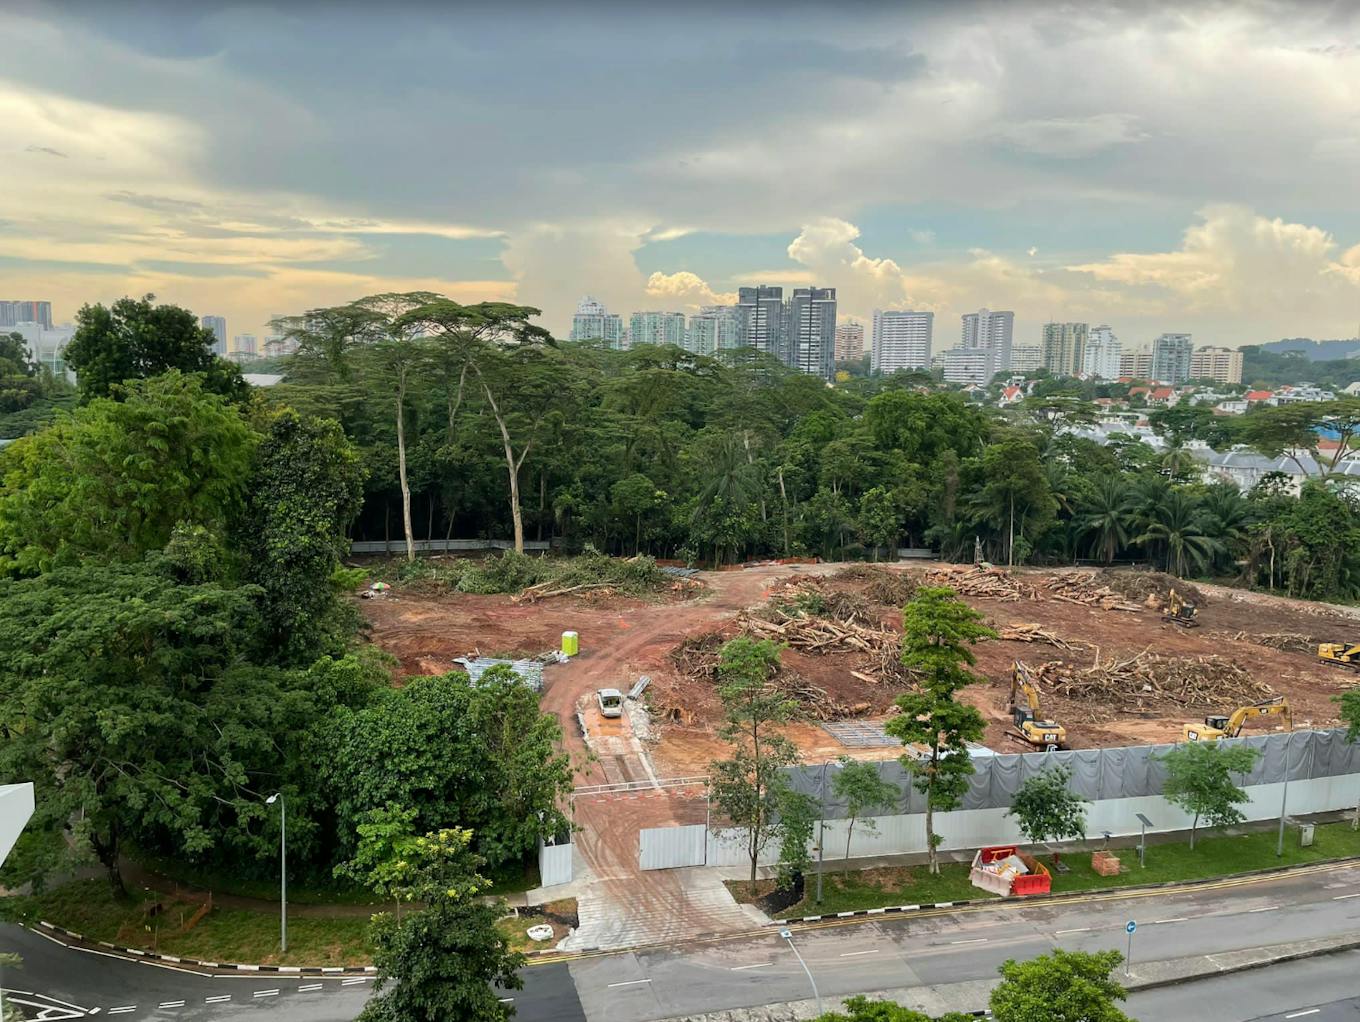 The clearing of Dover forest. The secondary forest, which has regrown over abandoned plantations, orchards and rural villages, had been earmarked for residential development since 2003 as the Ulu Pandan estate site. Image: